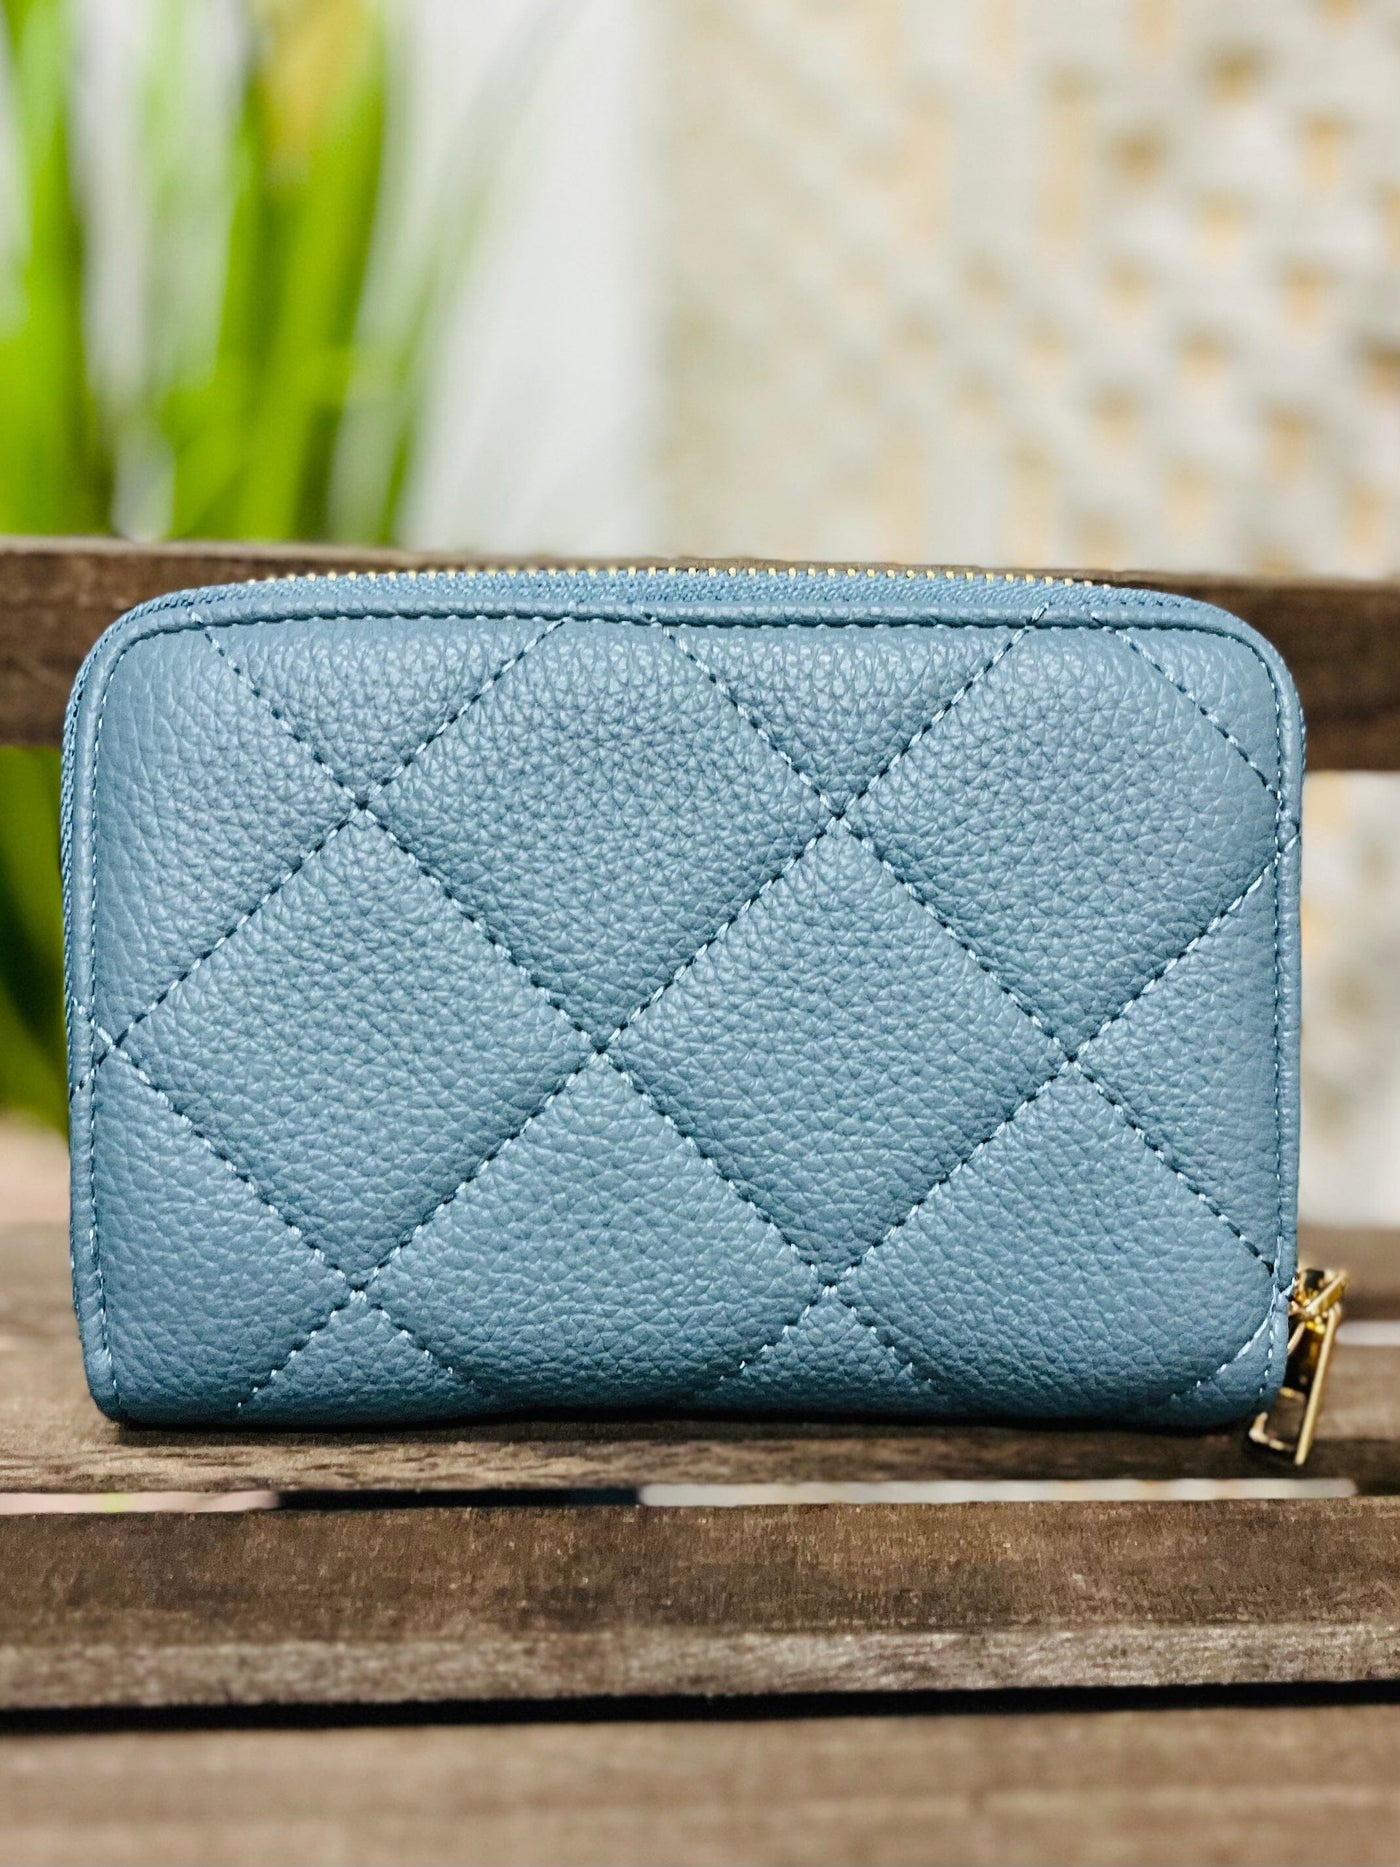 Quilted Star Purse-Blue